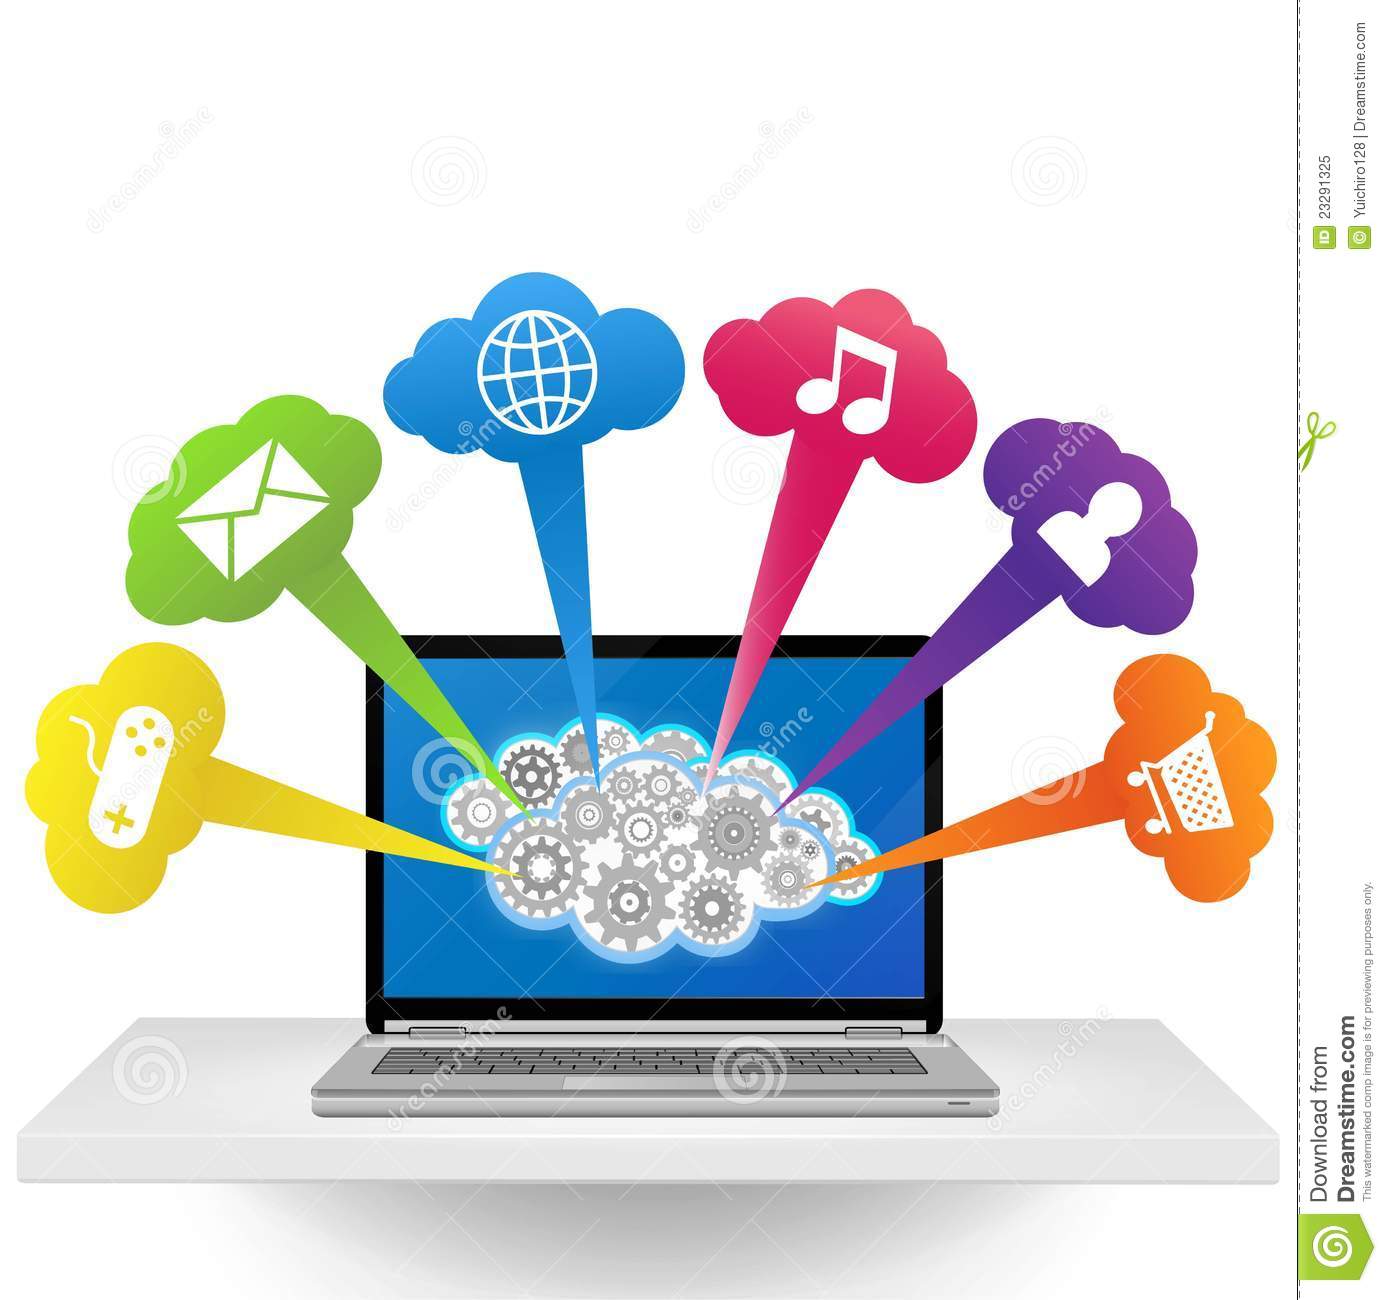 Laptop Computer With Applications Royalty Free Stock Photo   Image    